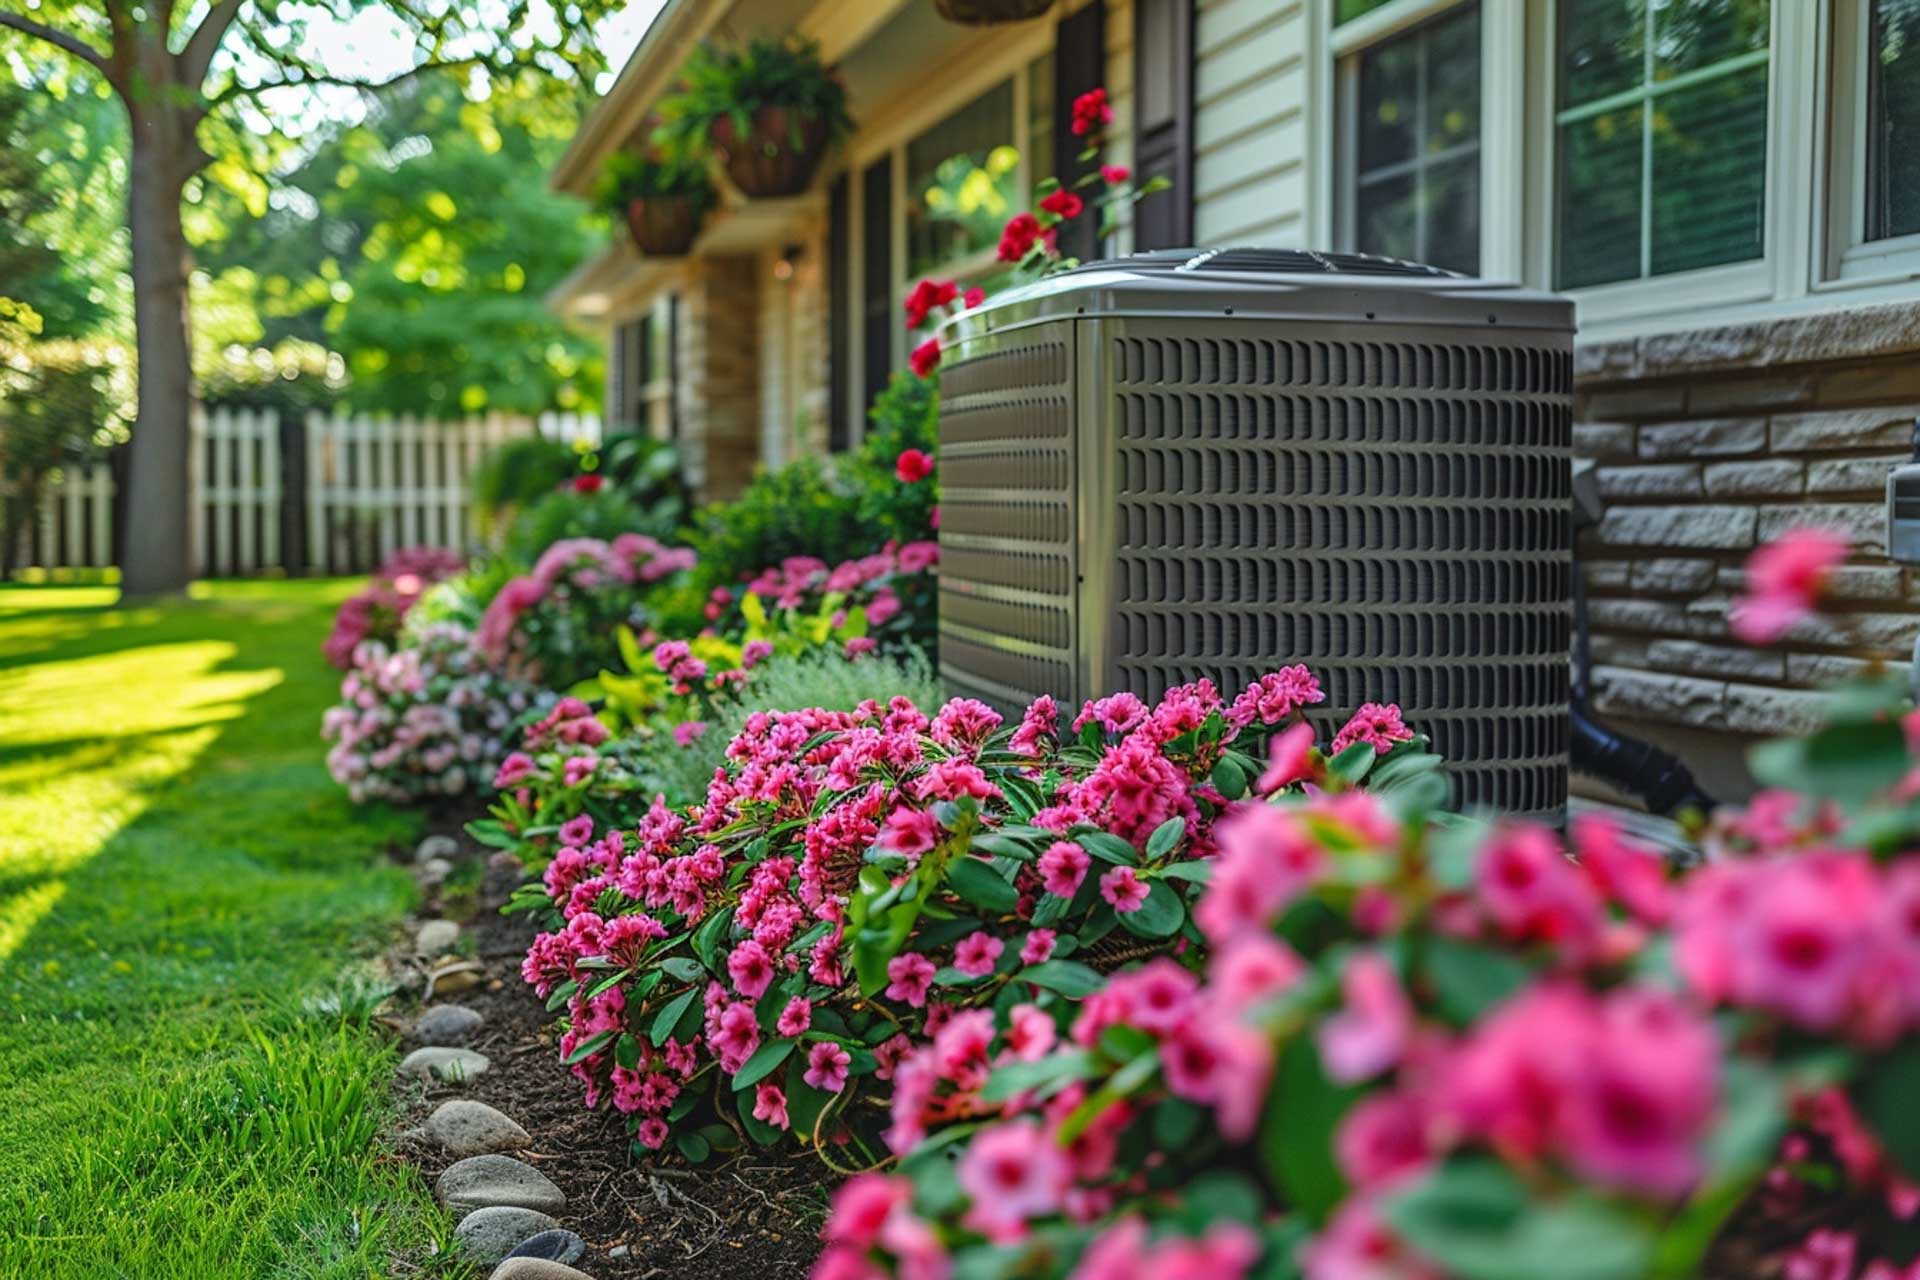 Air conditioning unit next to a house with a blooming flower bed and green lawn in the background.